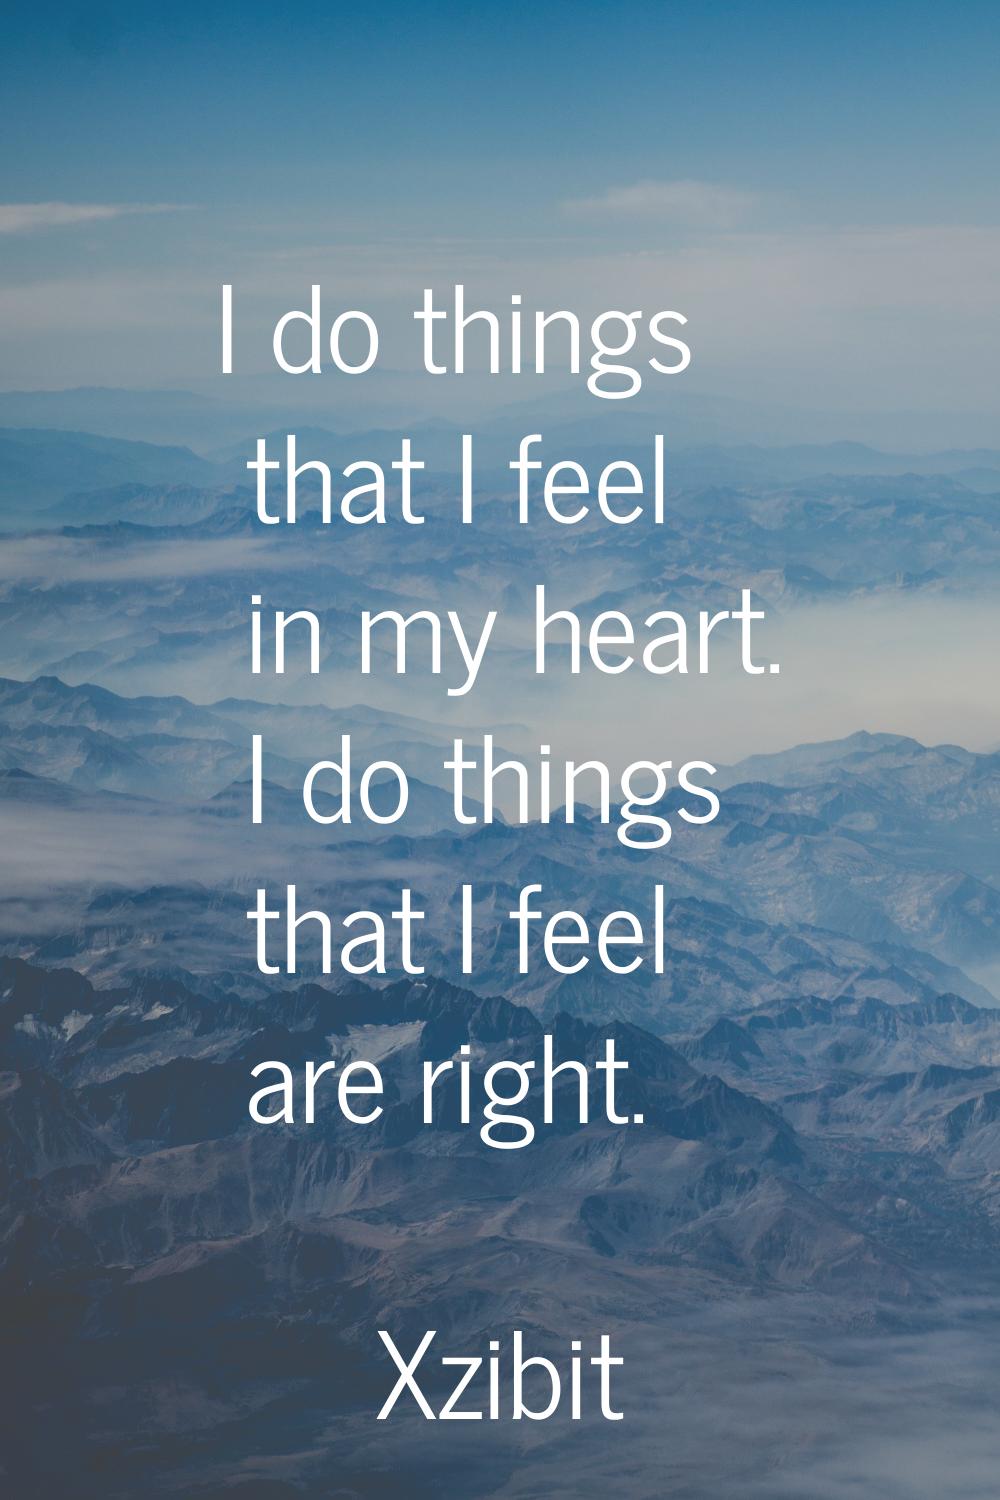 I do things that I feel in my heart. I do things that I feel are right.